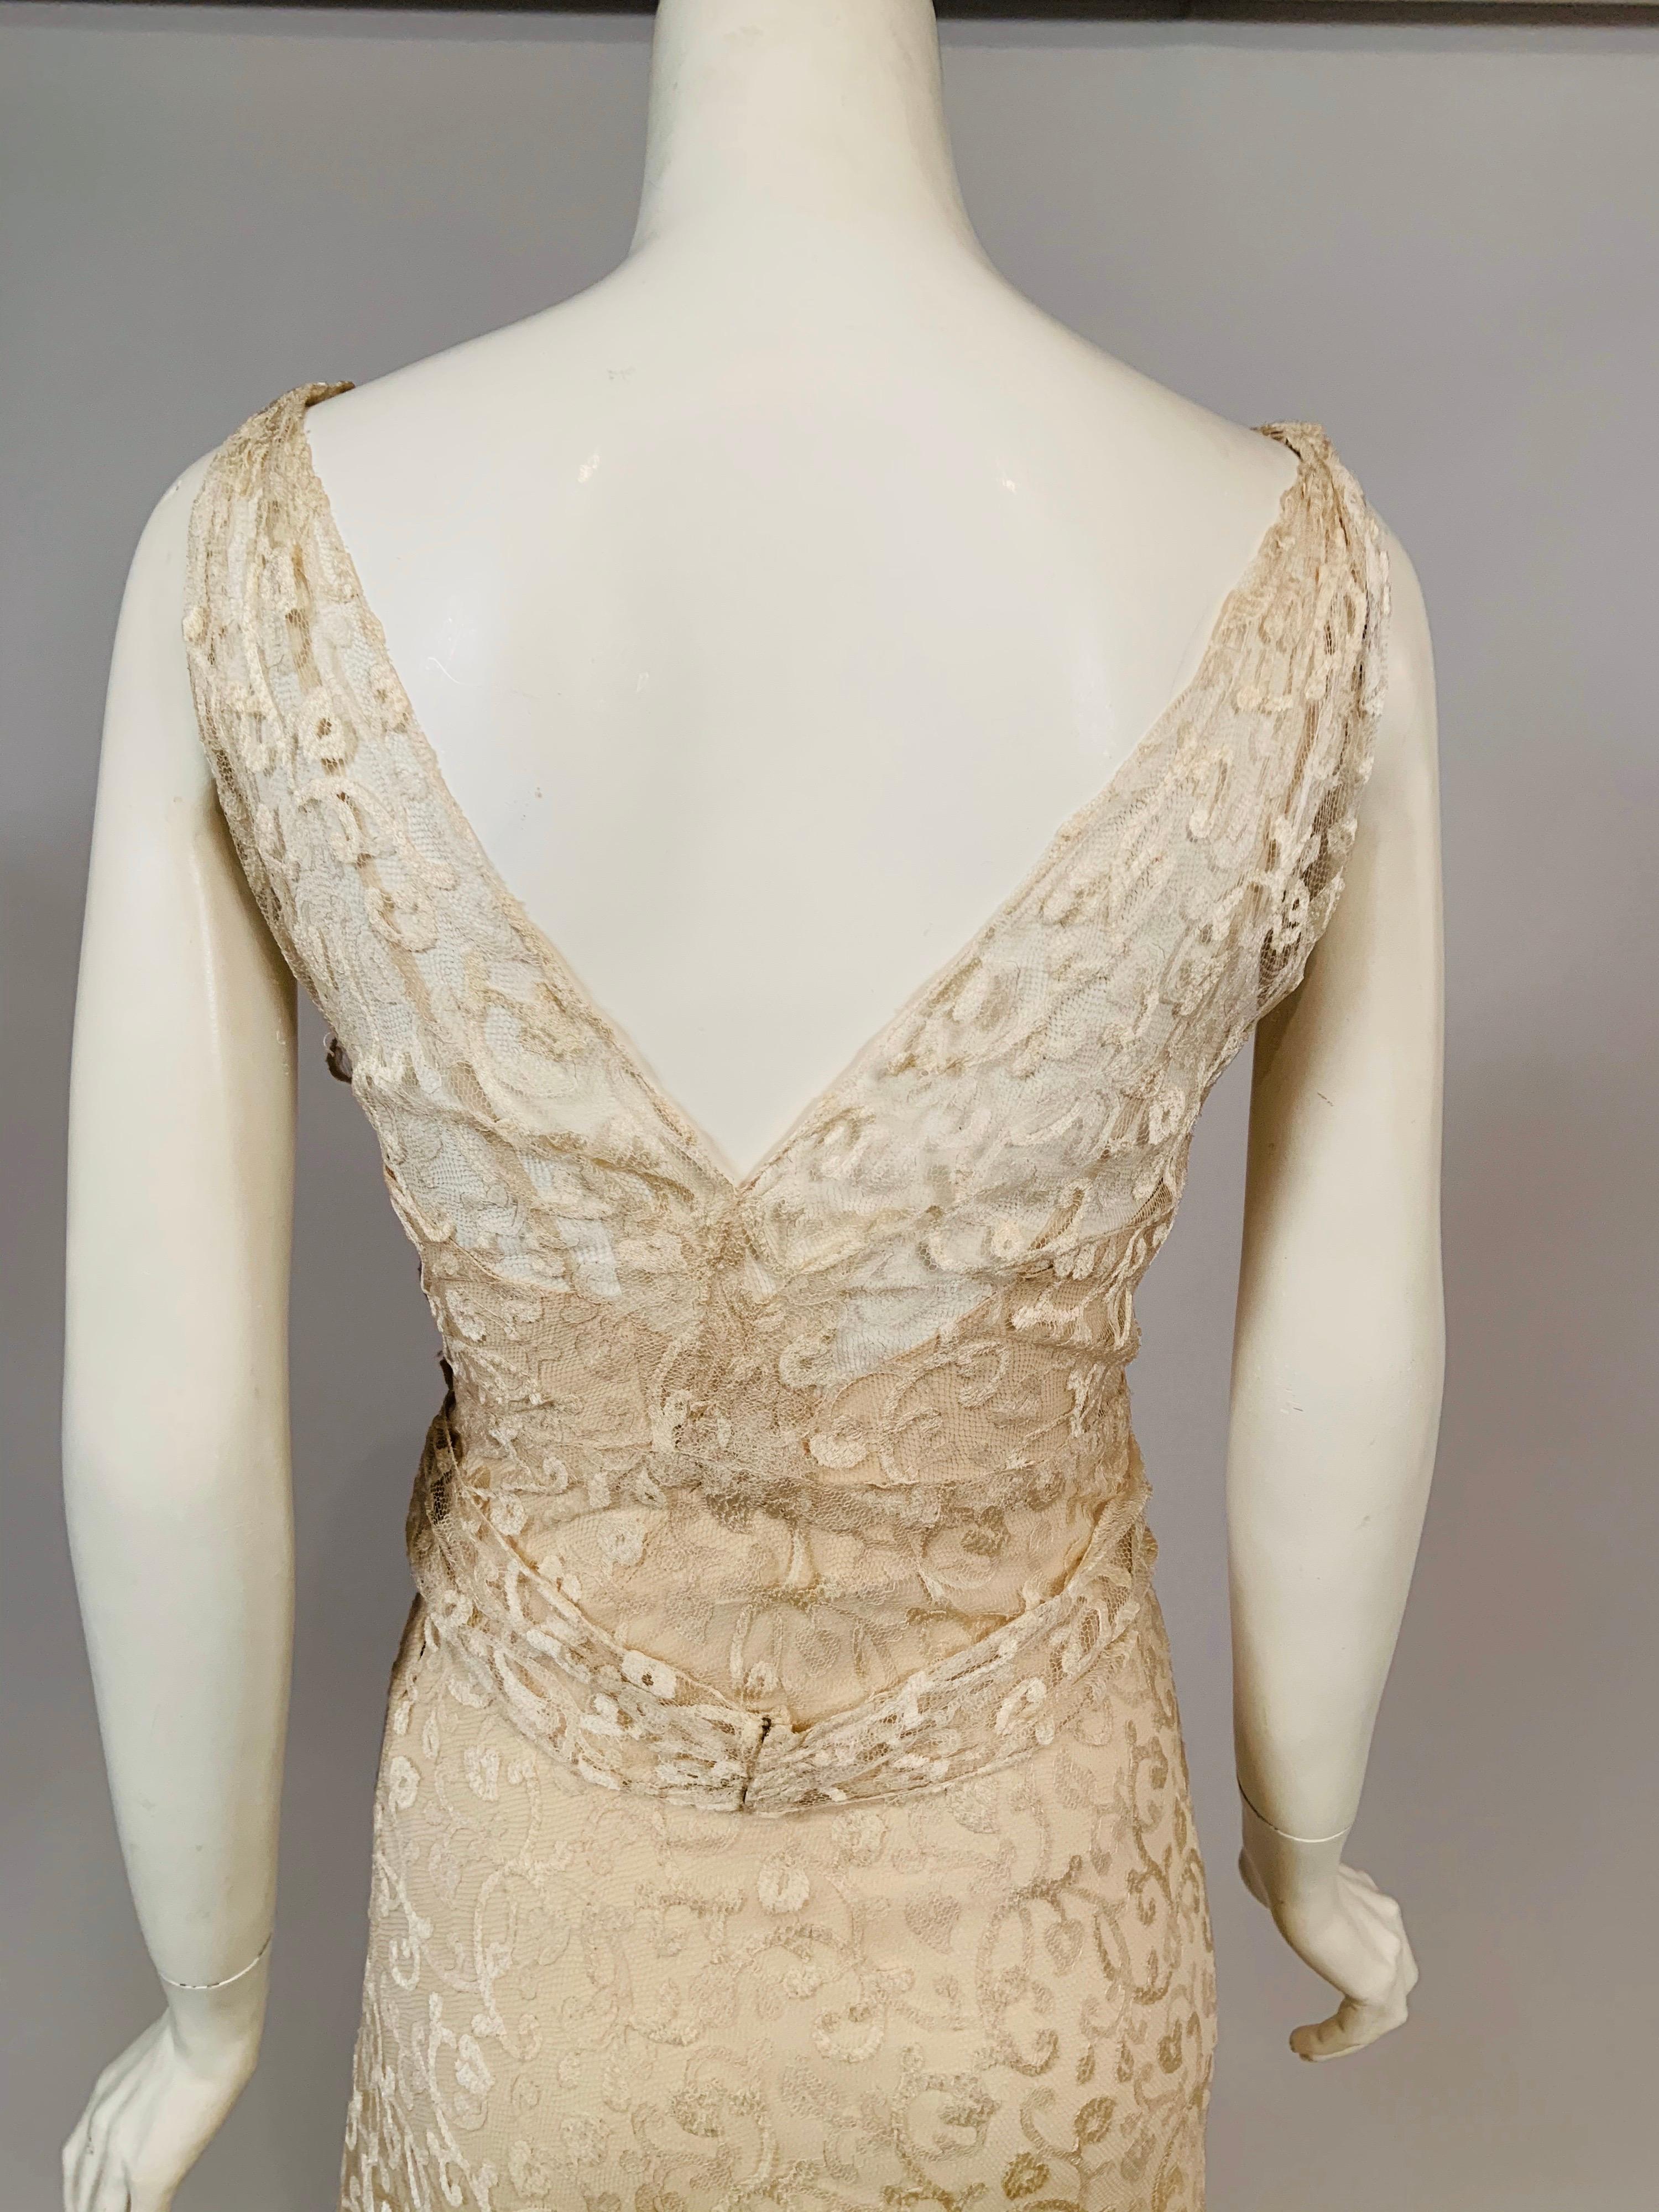 French 1930' Ivory Lace Bias Cut Evening Gown and Chiffon Slip by Bialo, Paris 2